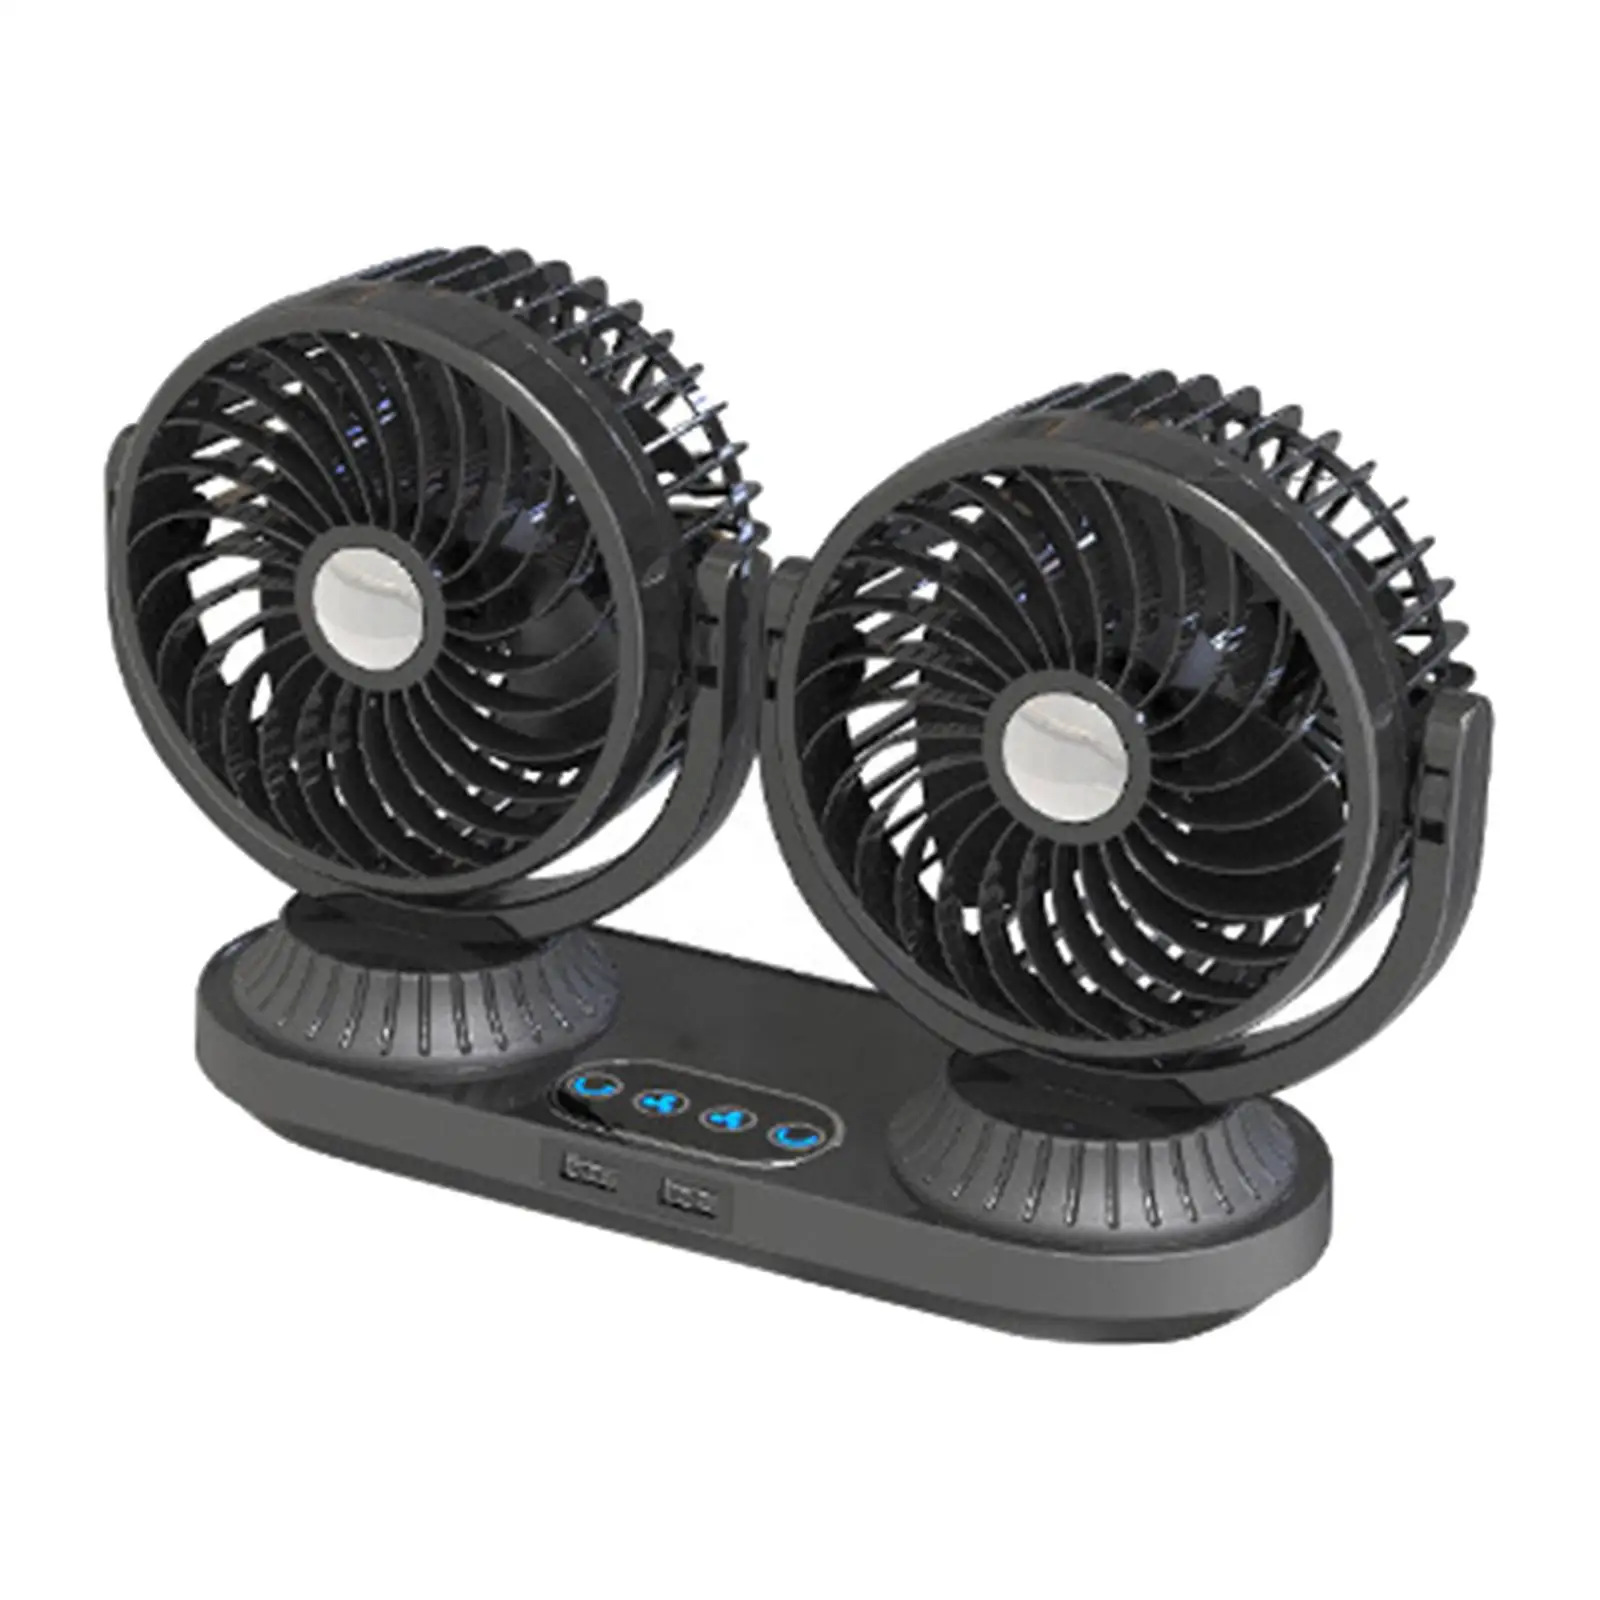 Dual Heads Car Fan 12V 24V Universal Summer Cooling Fan for Car 3 Speeds 360 Left and Right Touch Adjustment Portable Truck Fan